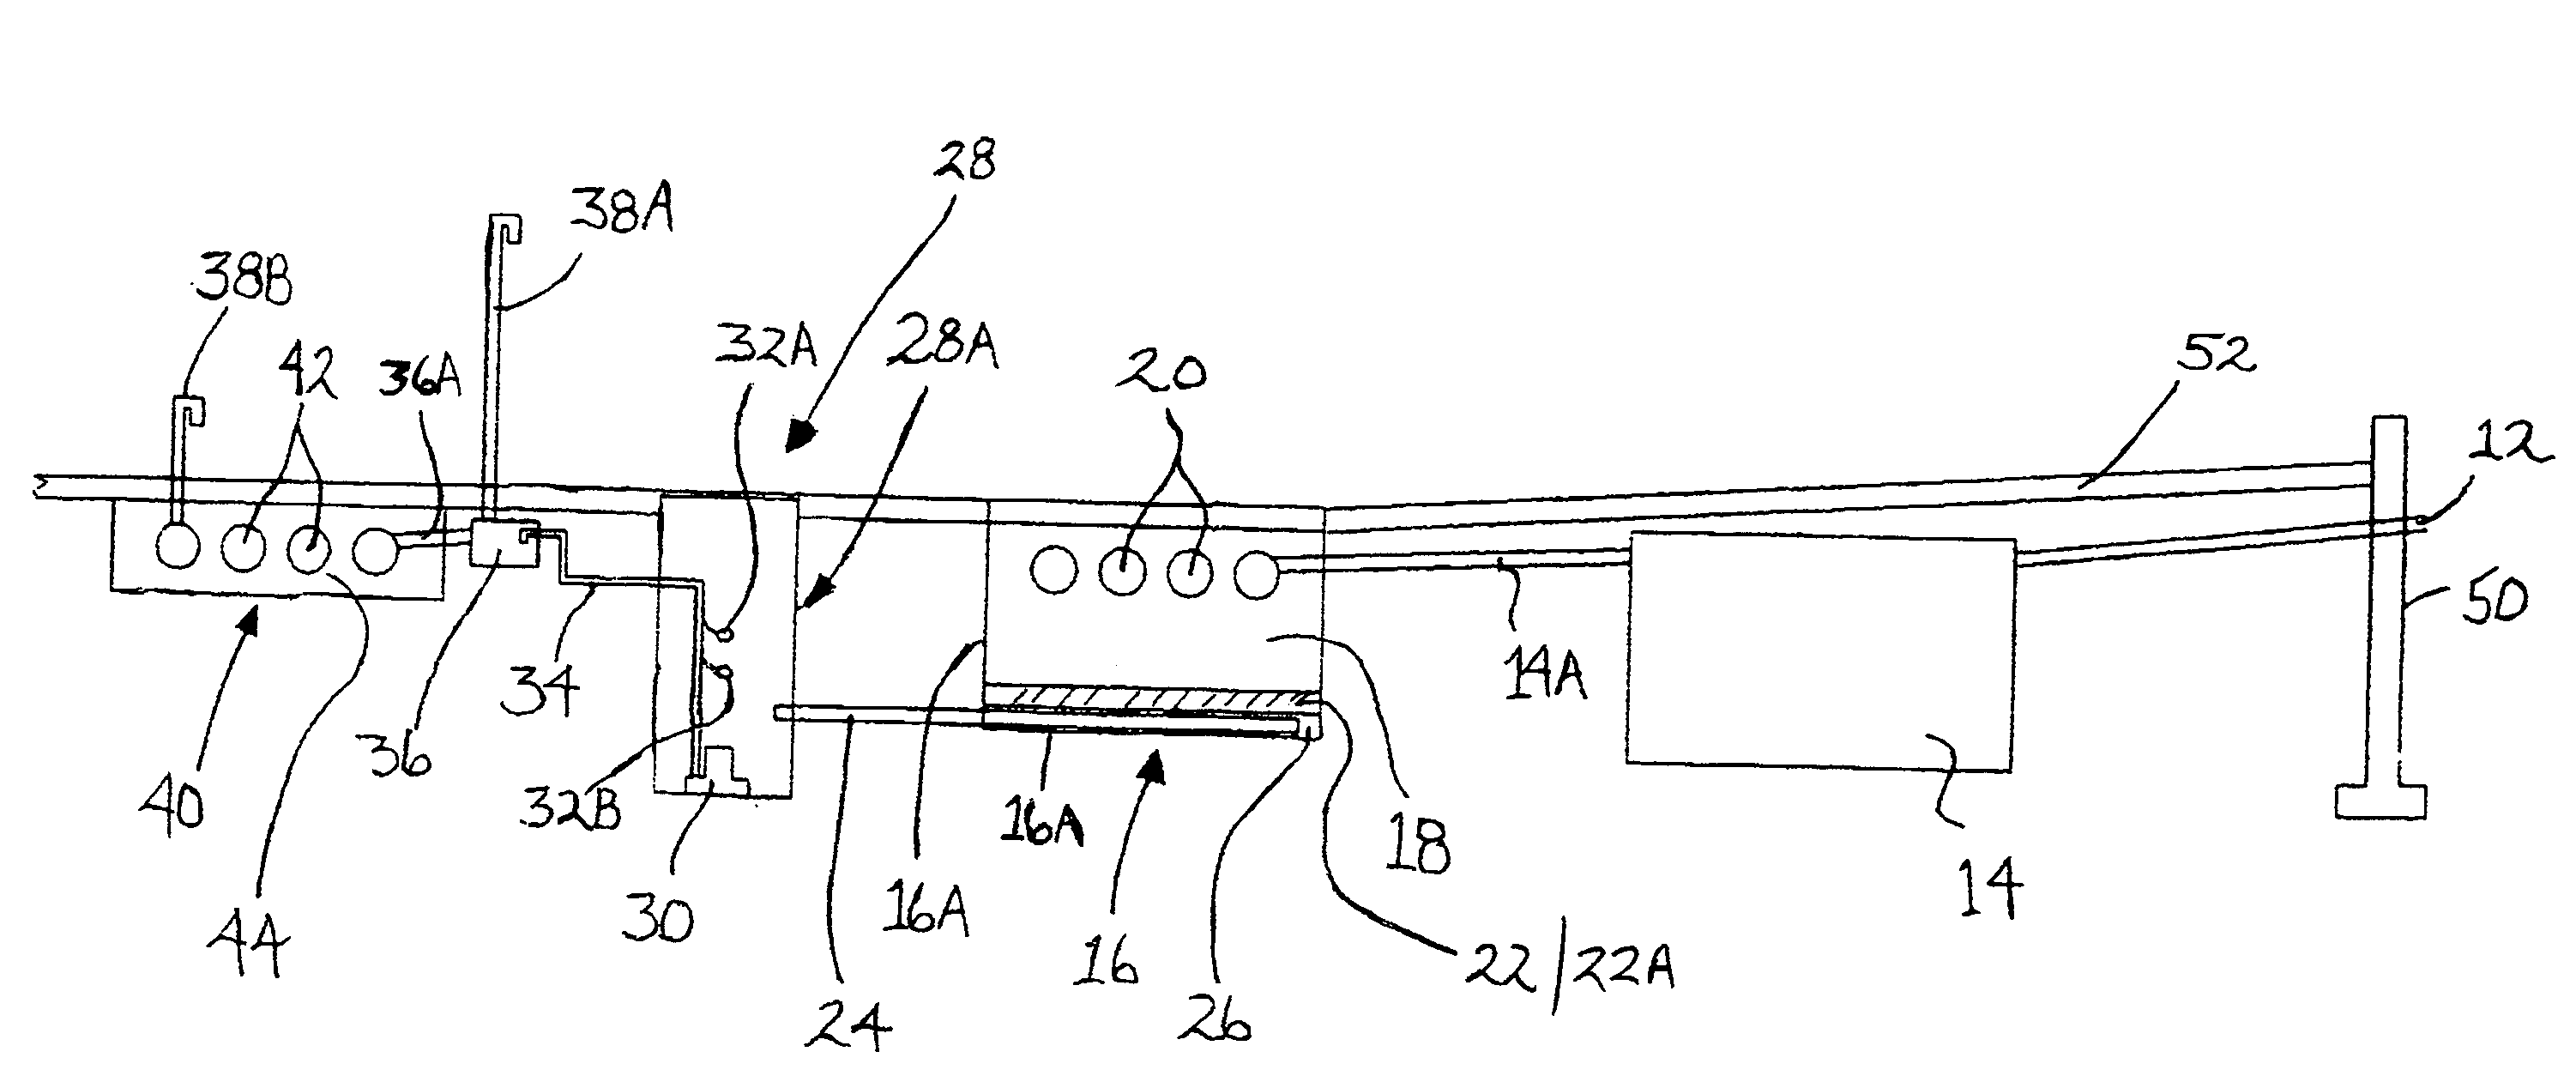 Method, apparatus and system for removal of contaminants from water